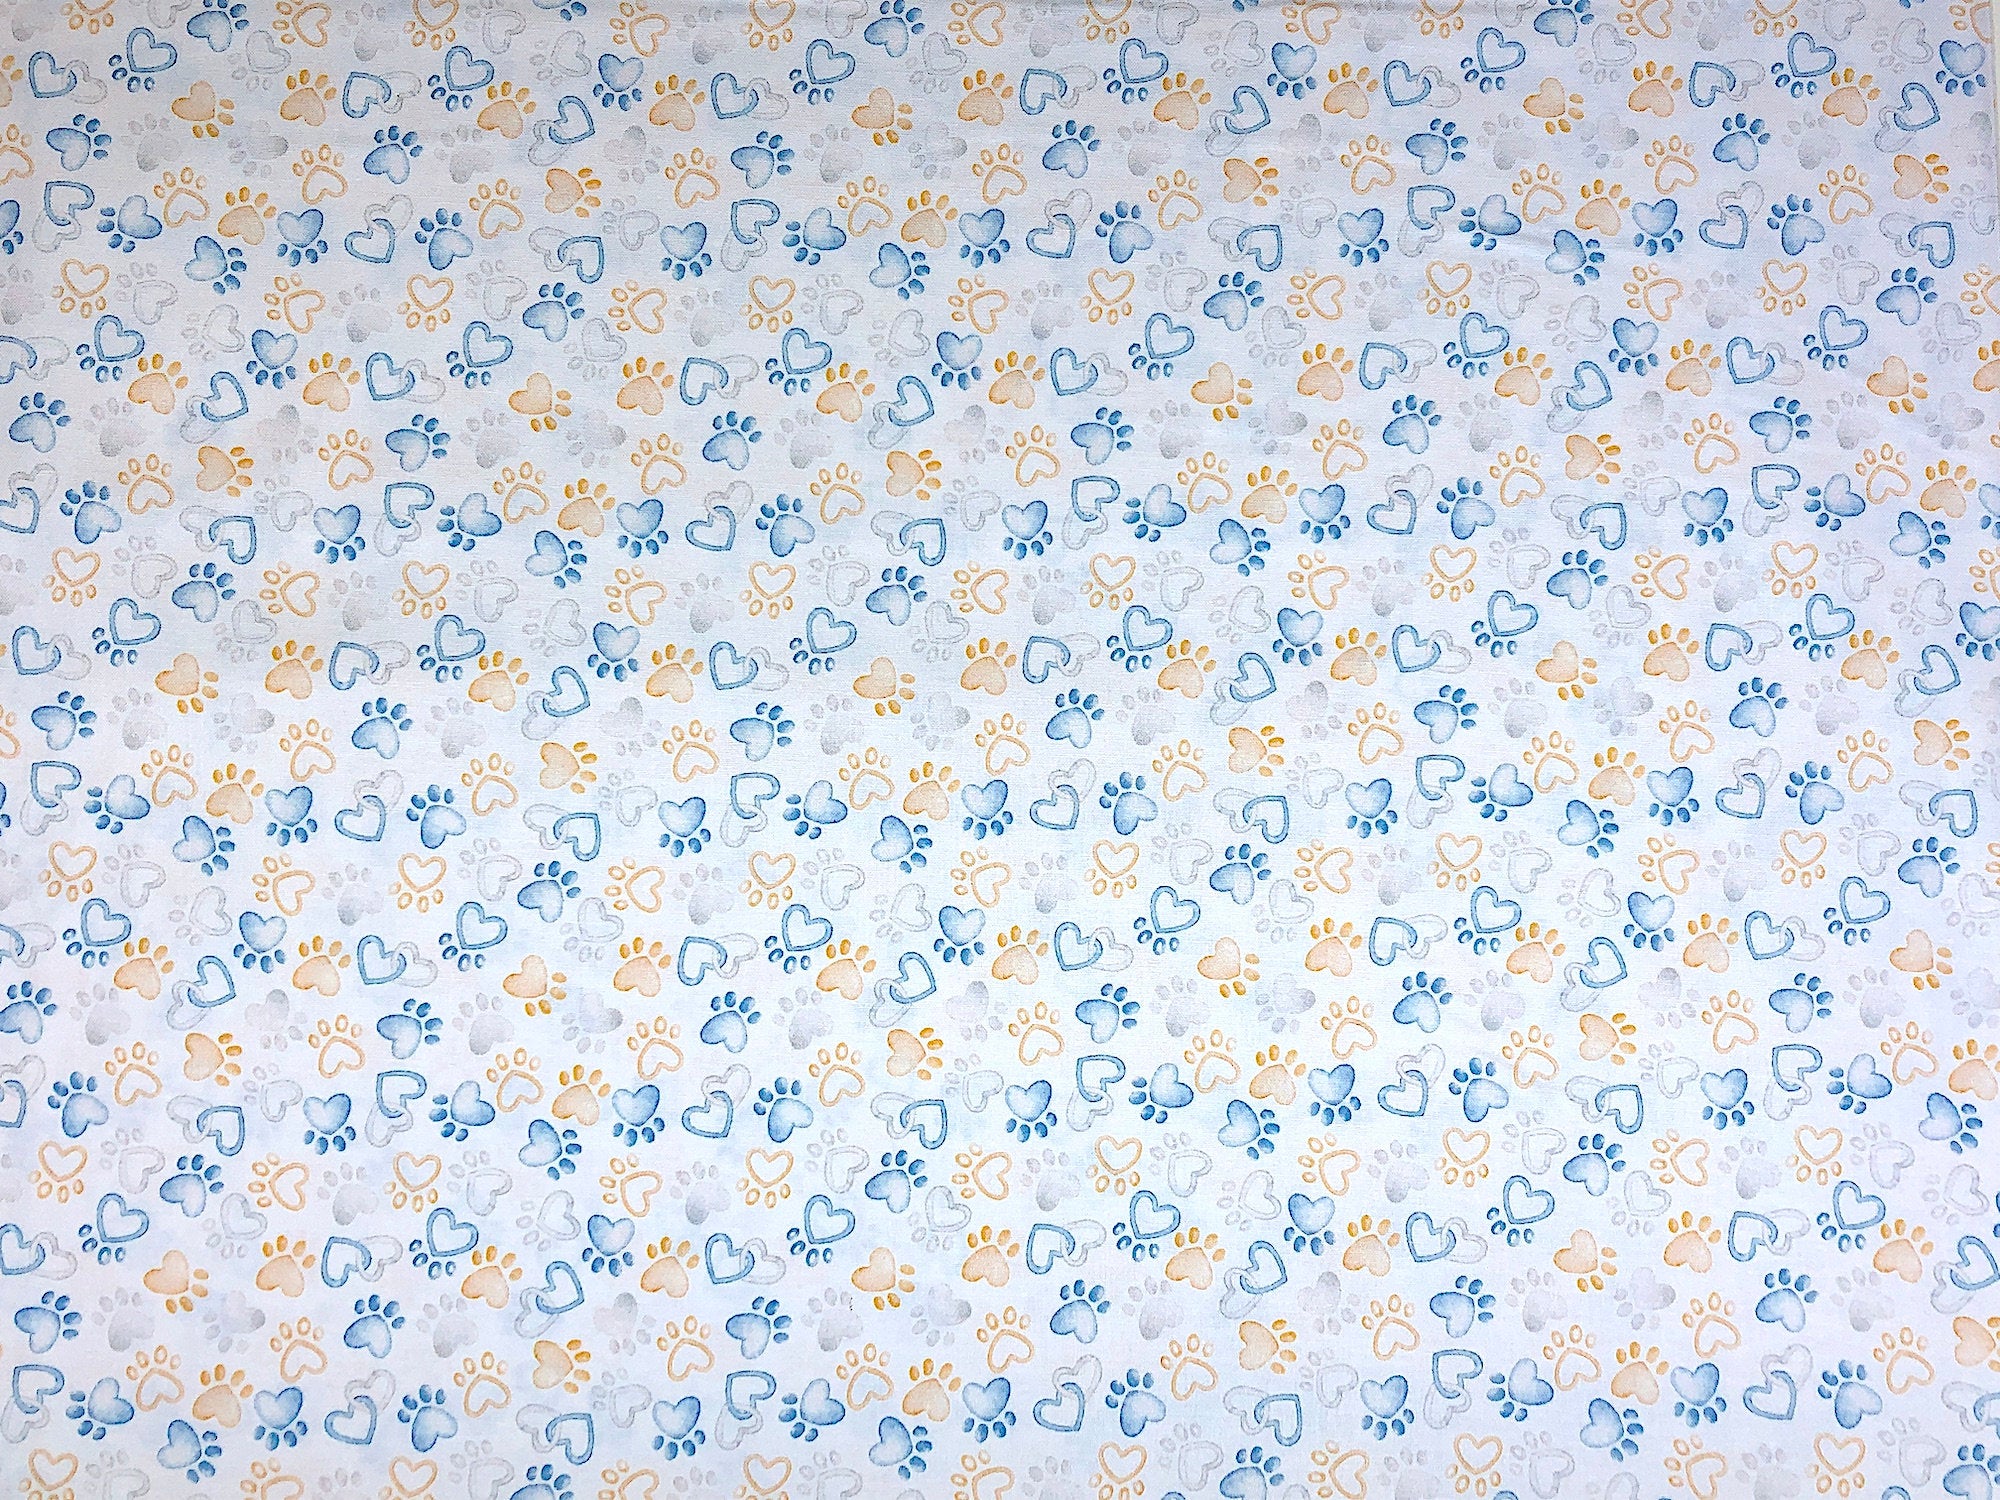 This white fabric is covered with paw prints and hearts.